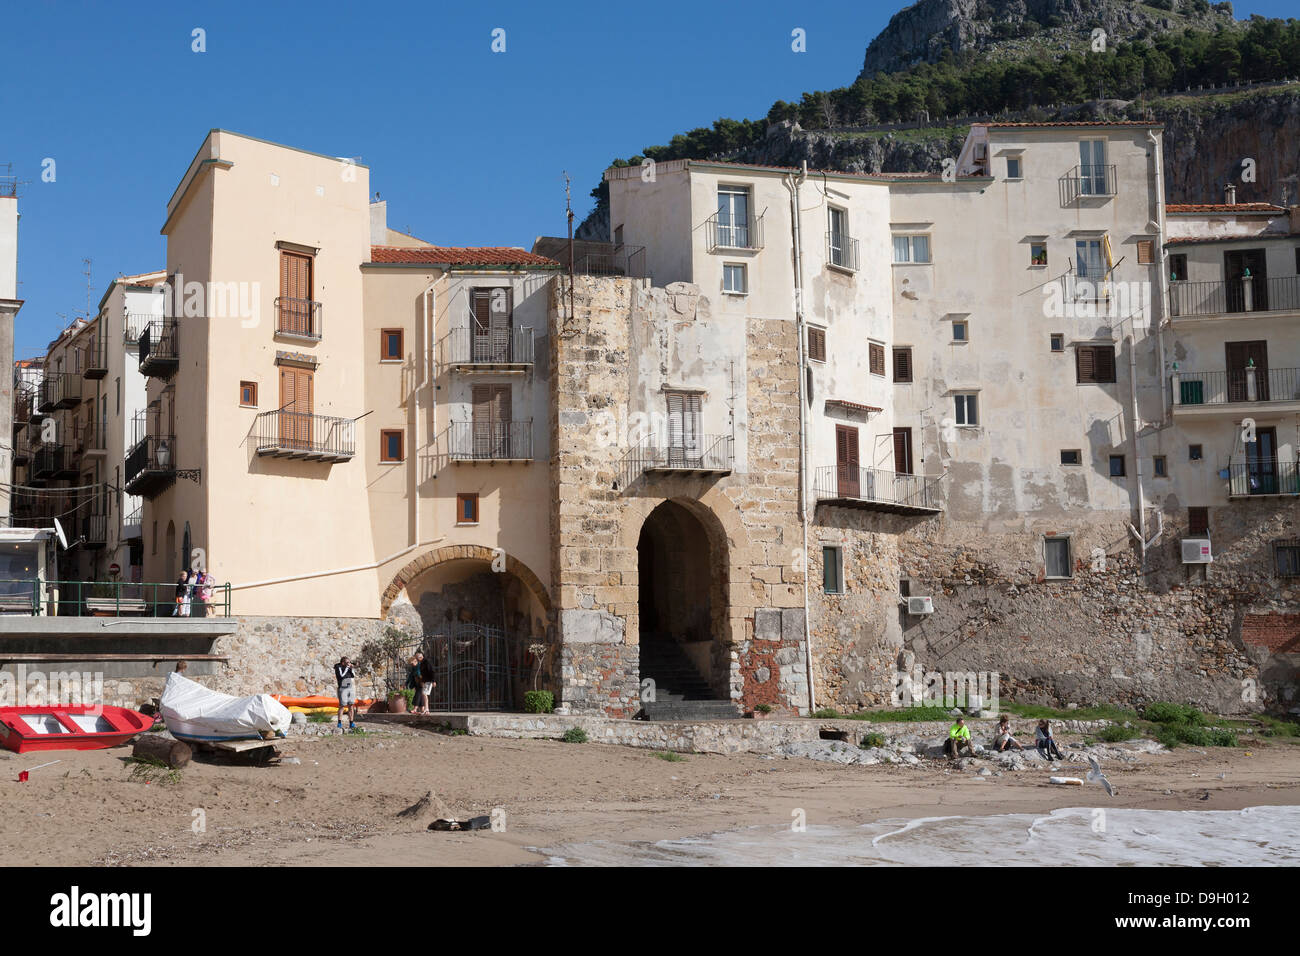 Porta Pescara Old Port And Old Town Of Cefalu Sicily Italy Stock Photo Alamy